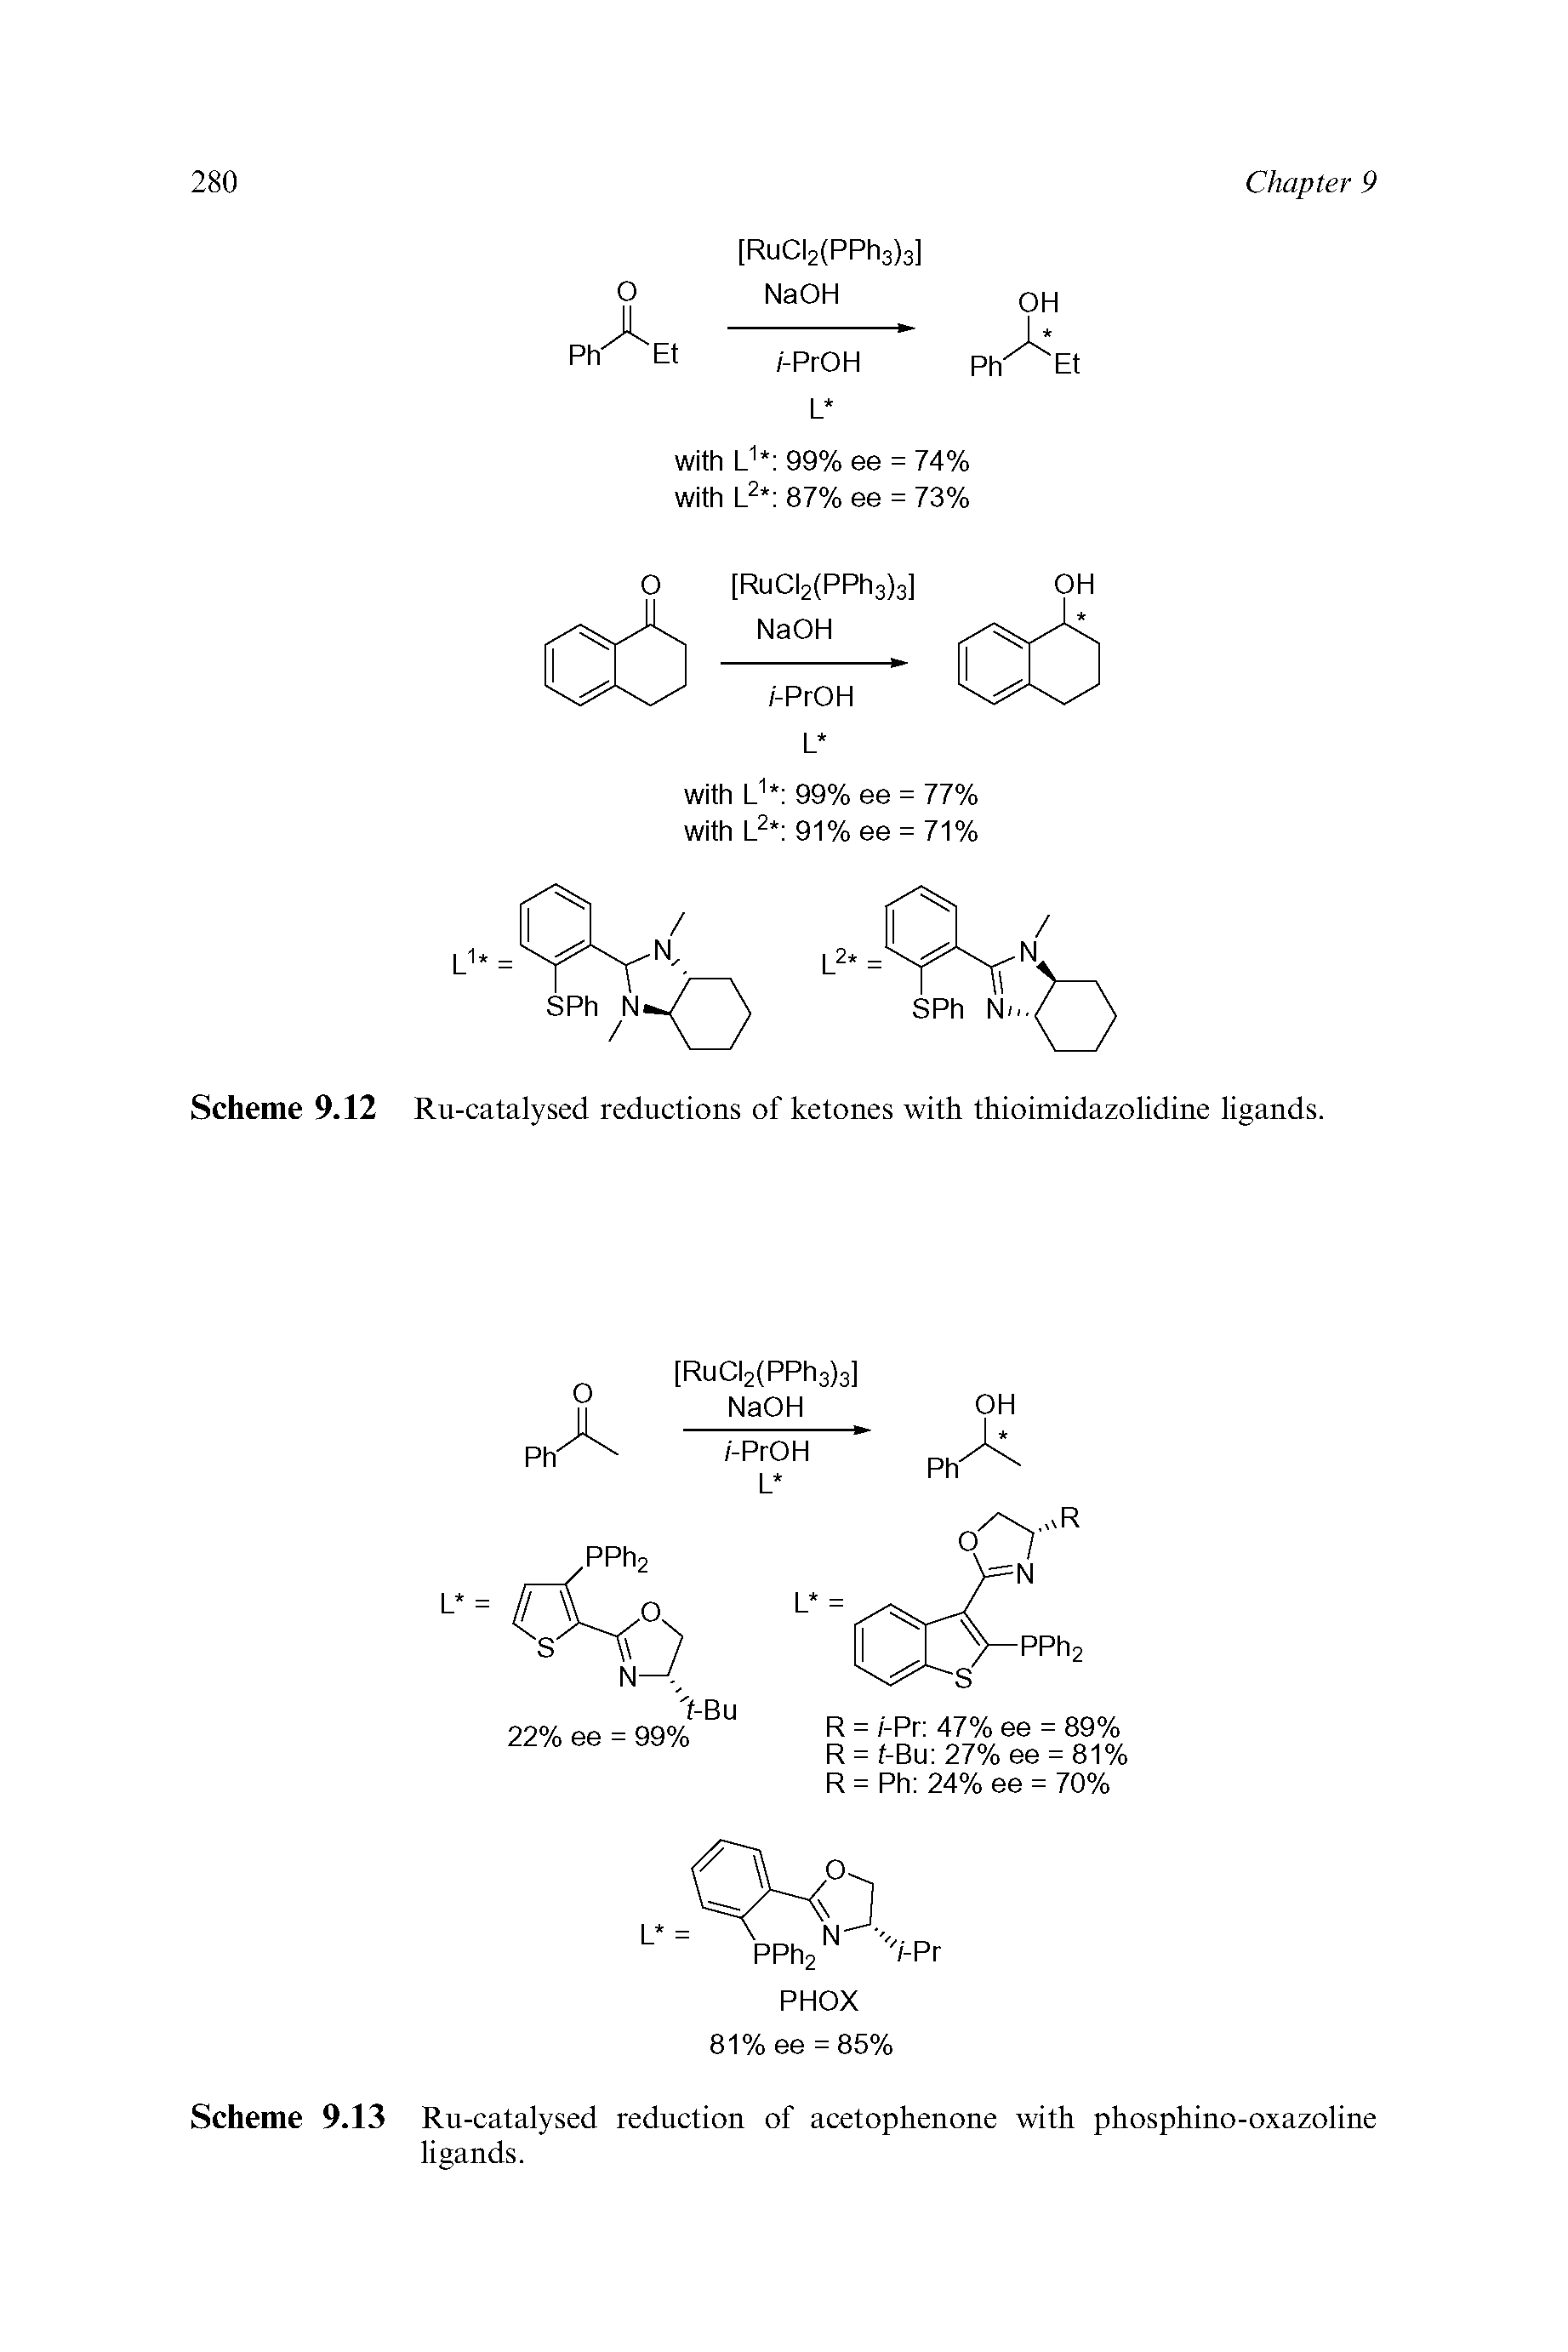 Scheme 9.13 Ru-catalysed reduction of acetophenone with phosphino-oxazoline ligands.